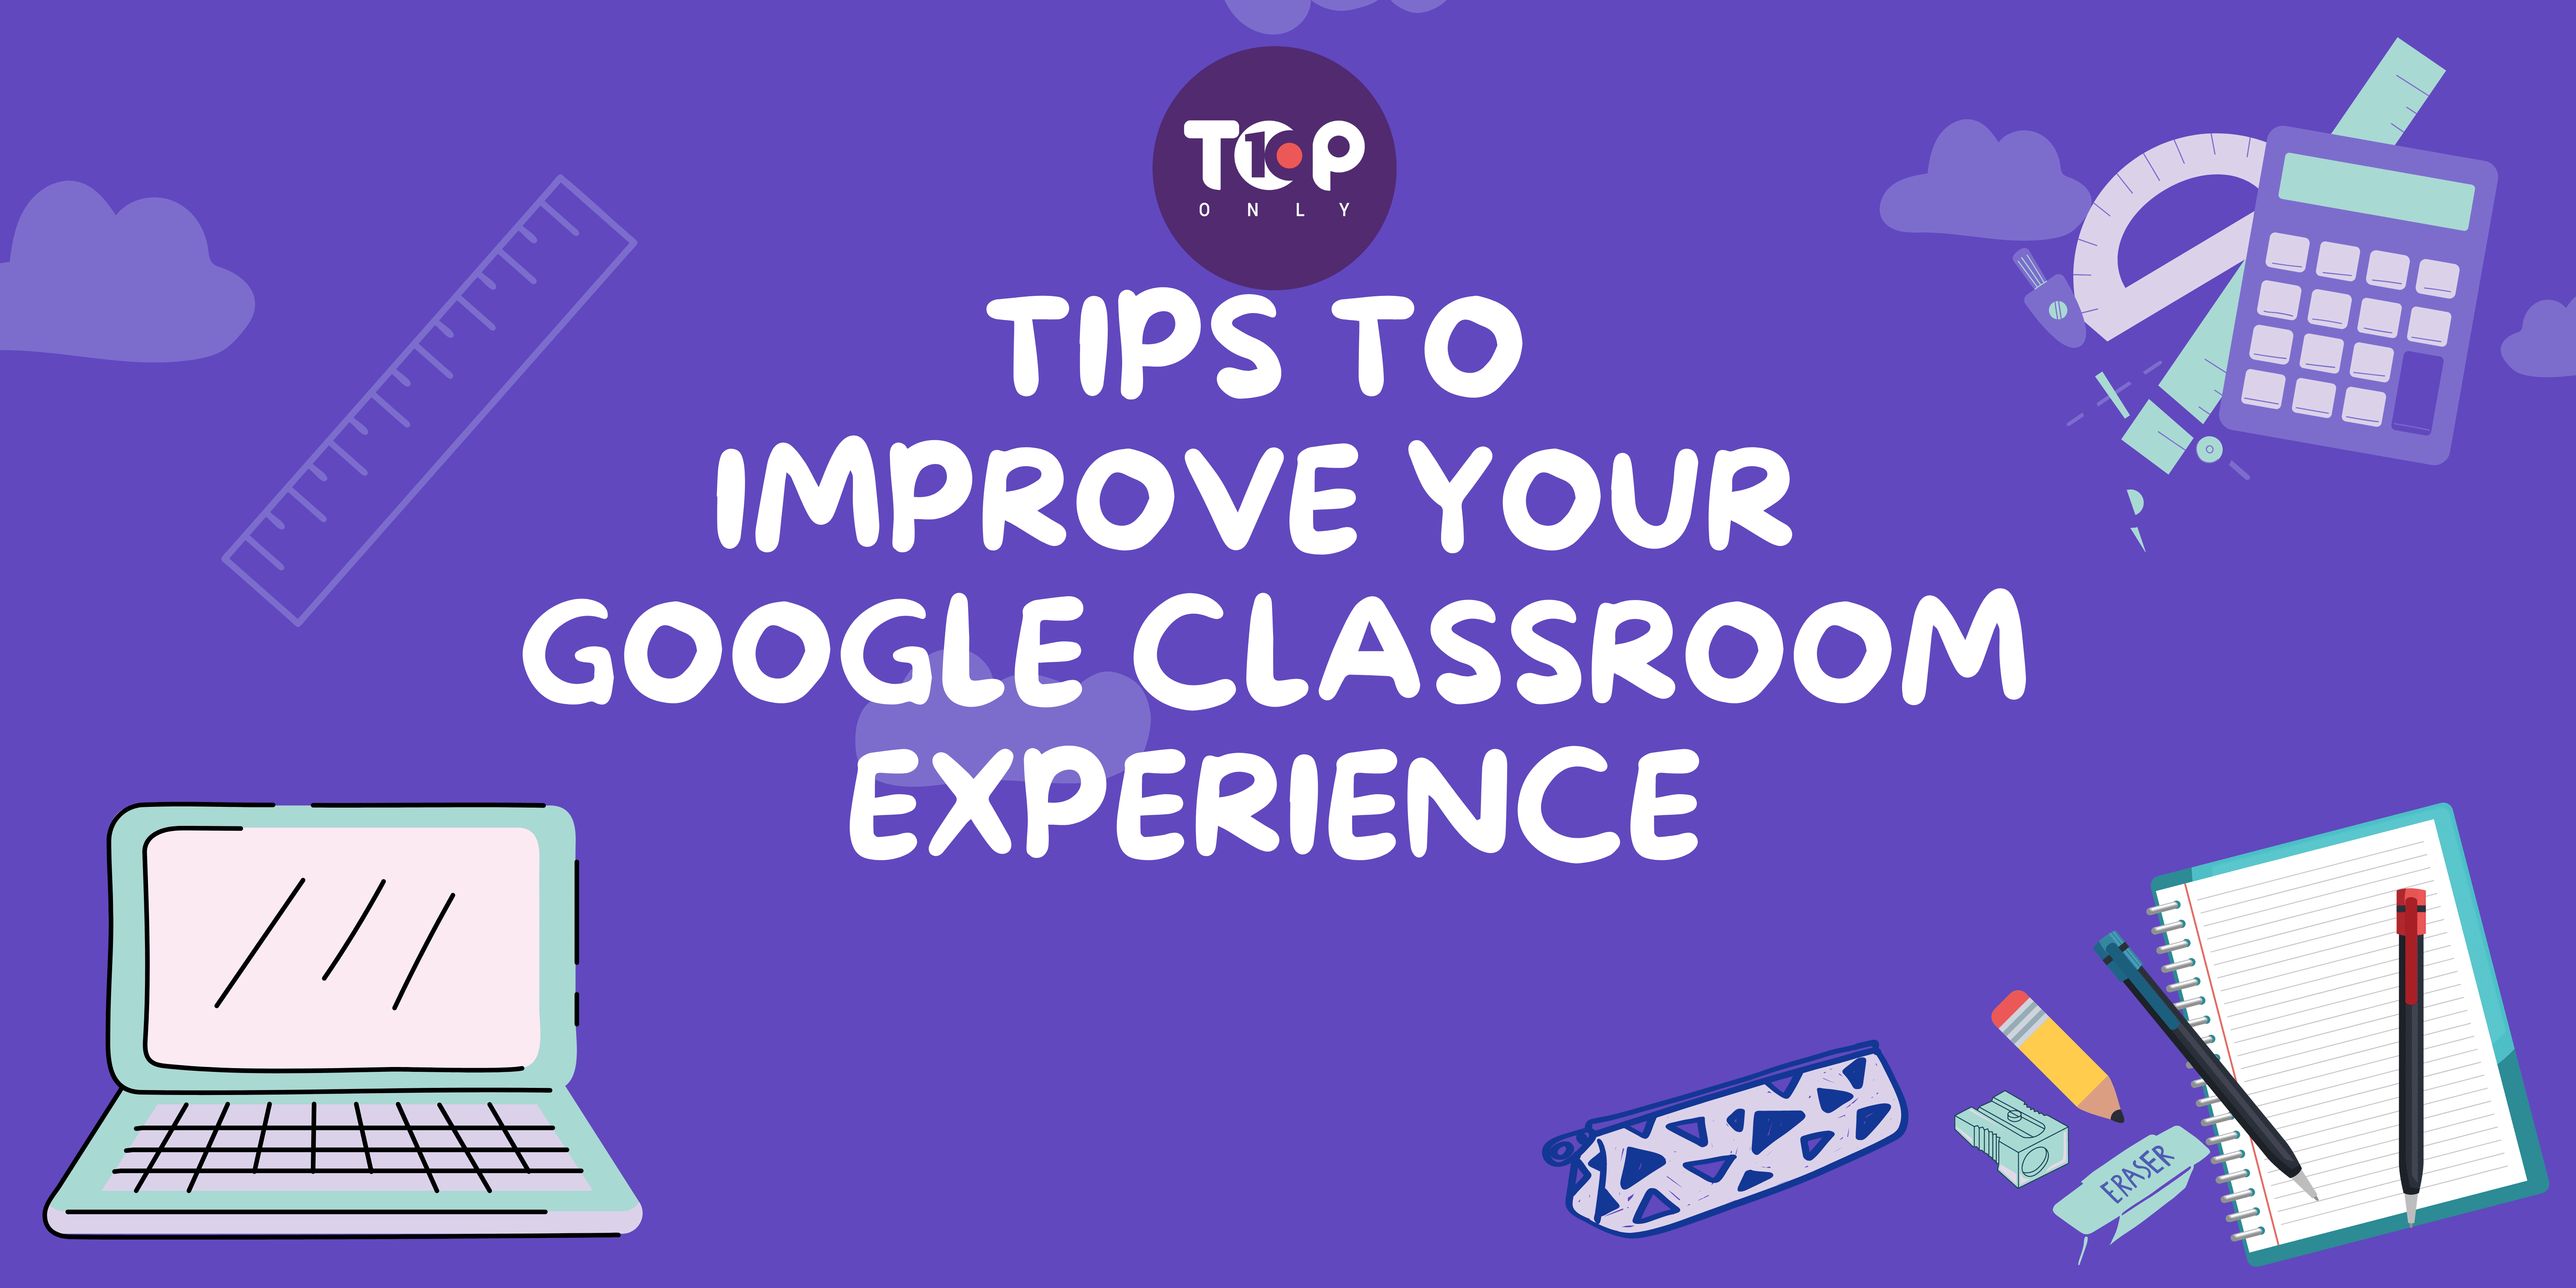 Top 10 Tips to Improve Your Google Classroom Experience